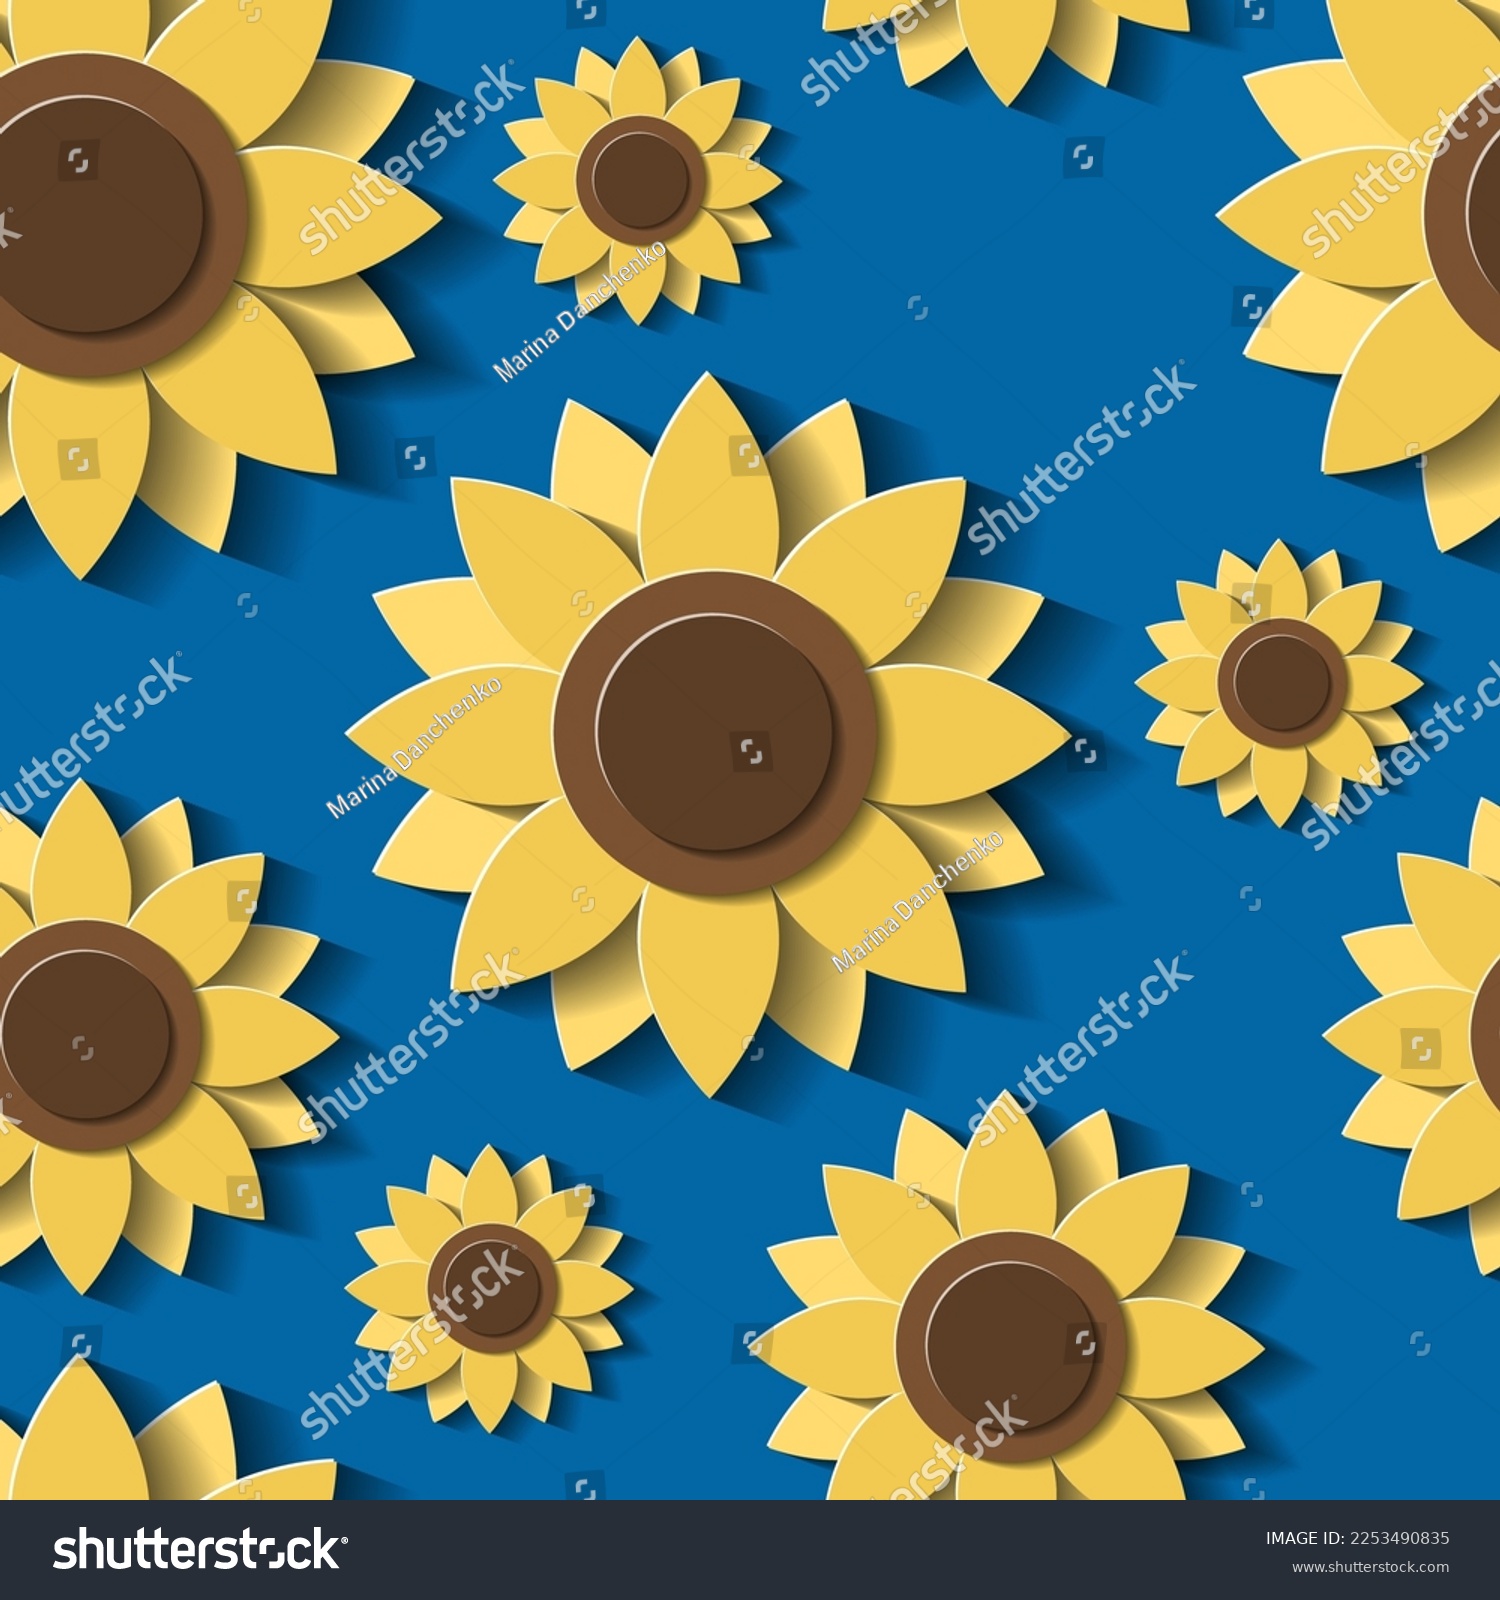 SVG of Floral seamless pattern. 3d Sunflowers on blue background. Yellow flowers in paper cut style. Vector illustration. svg